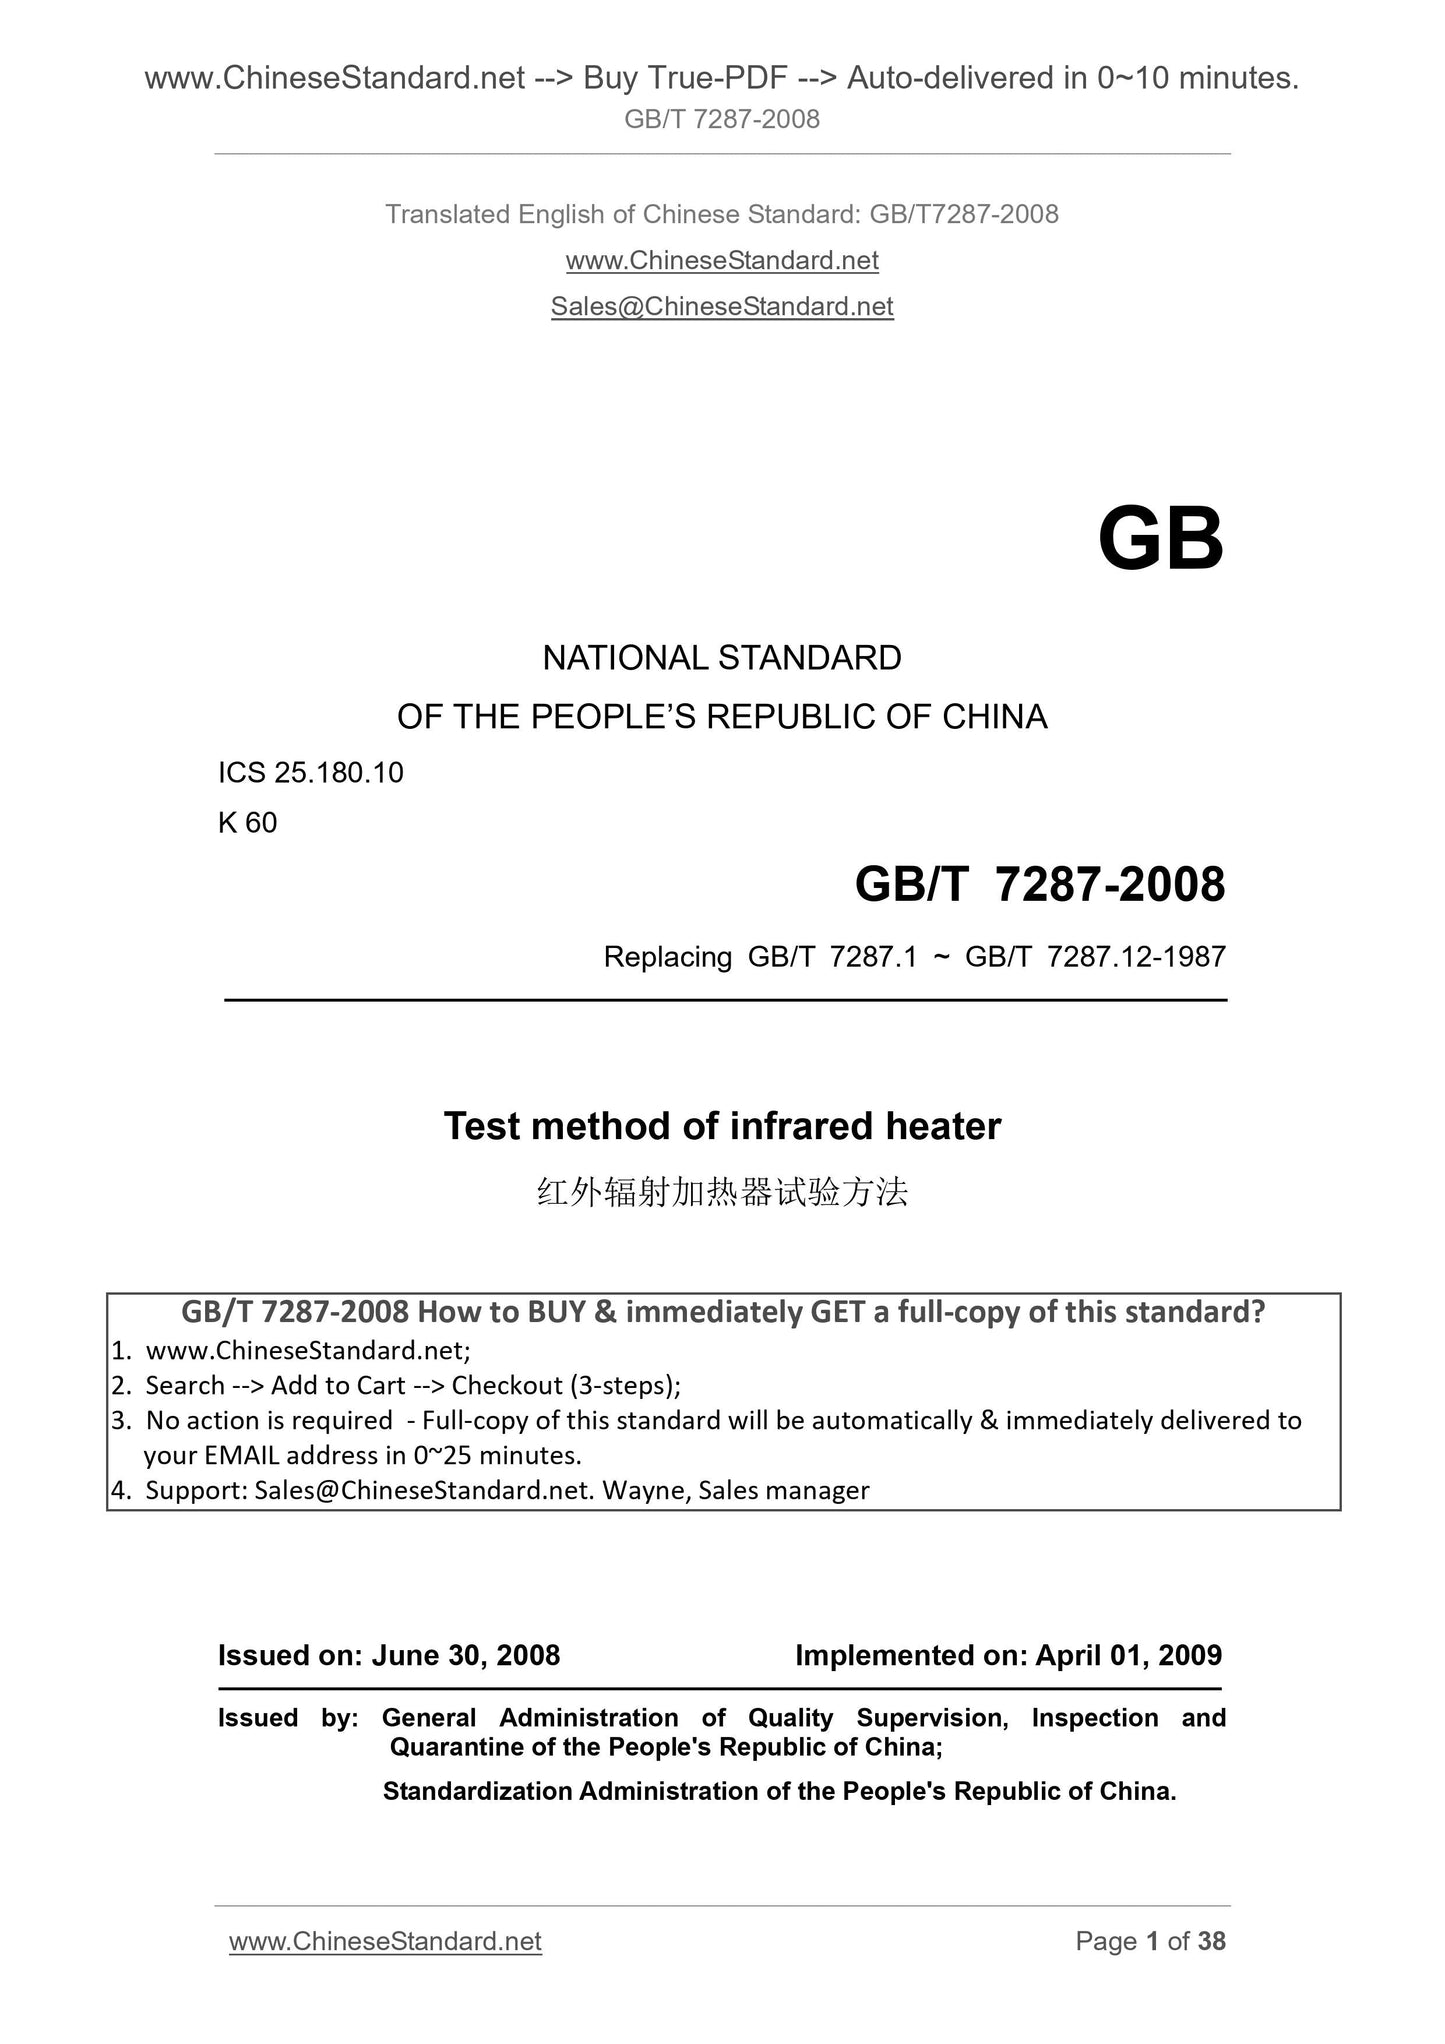 GB/T 7287-2008 Page 1